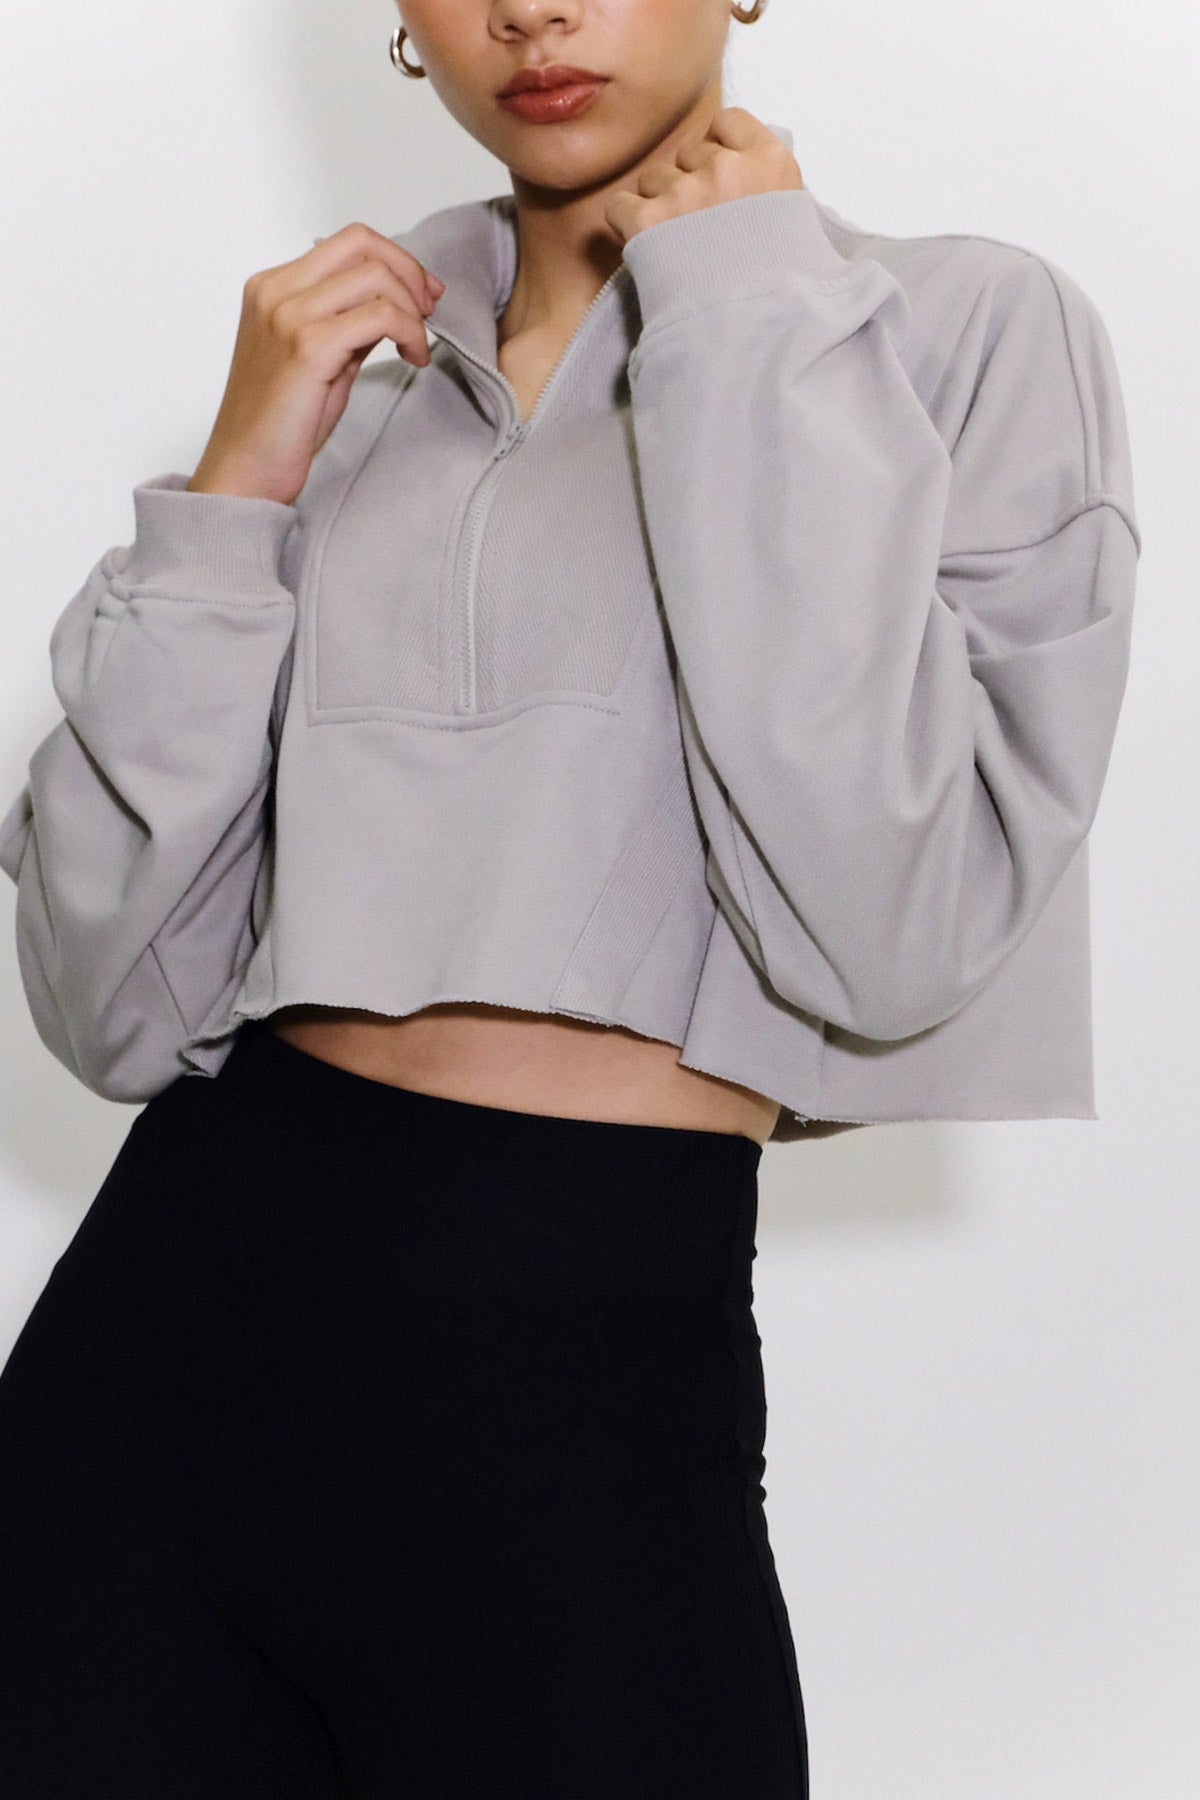 Snug Cropped Pullover in Gray (1 L Left)